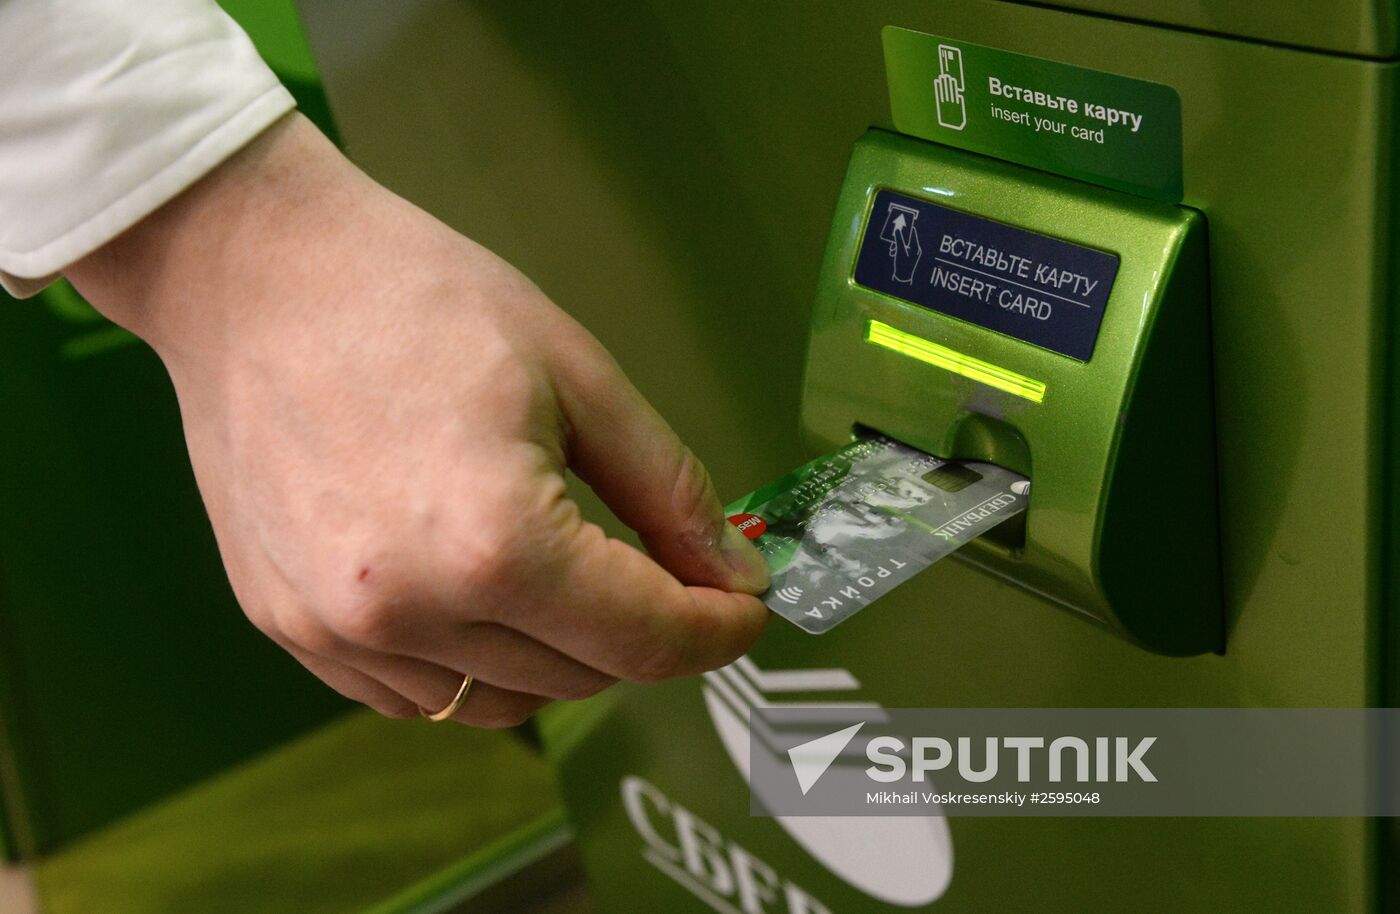 Sberbank, MasterCard, UEK and Moscow's Transport Department present a joint project